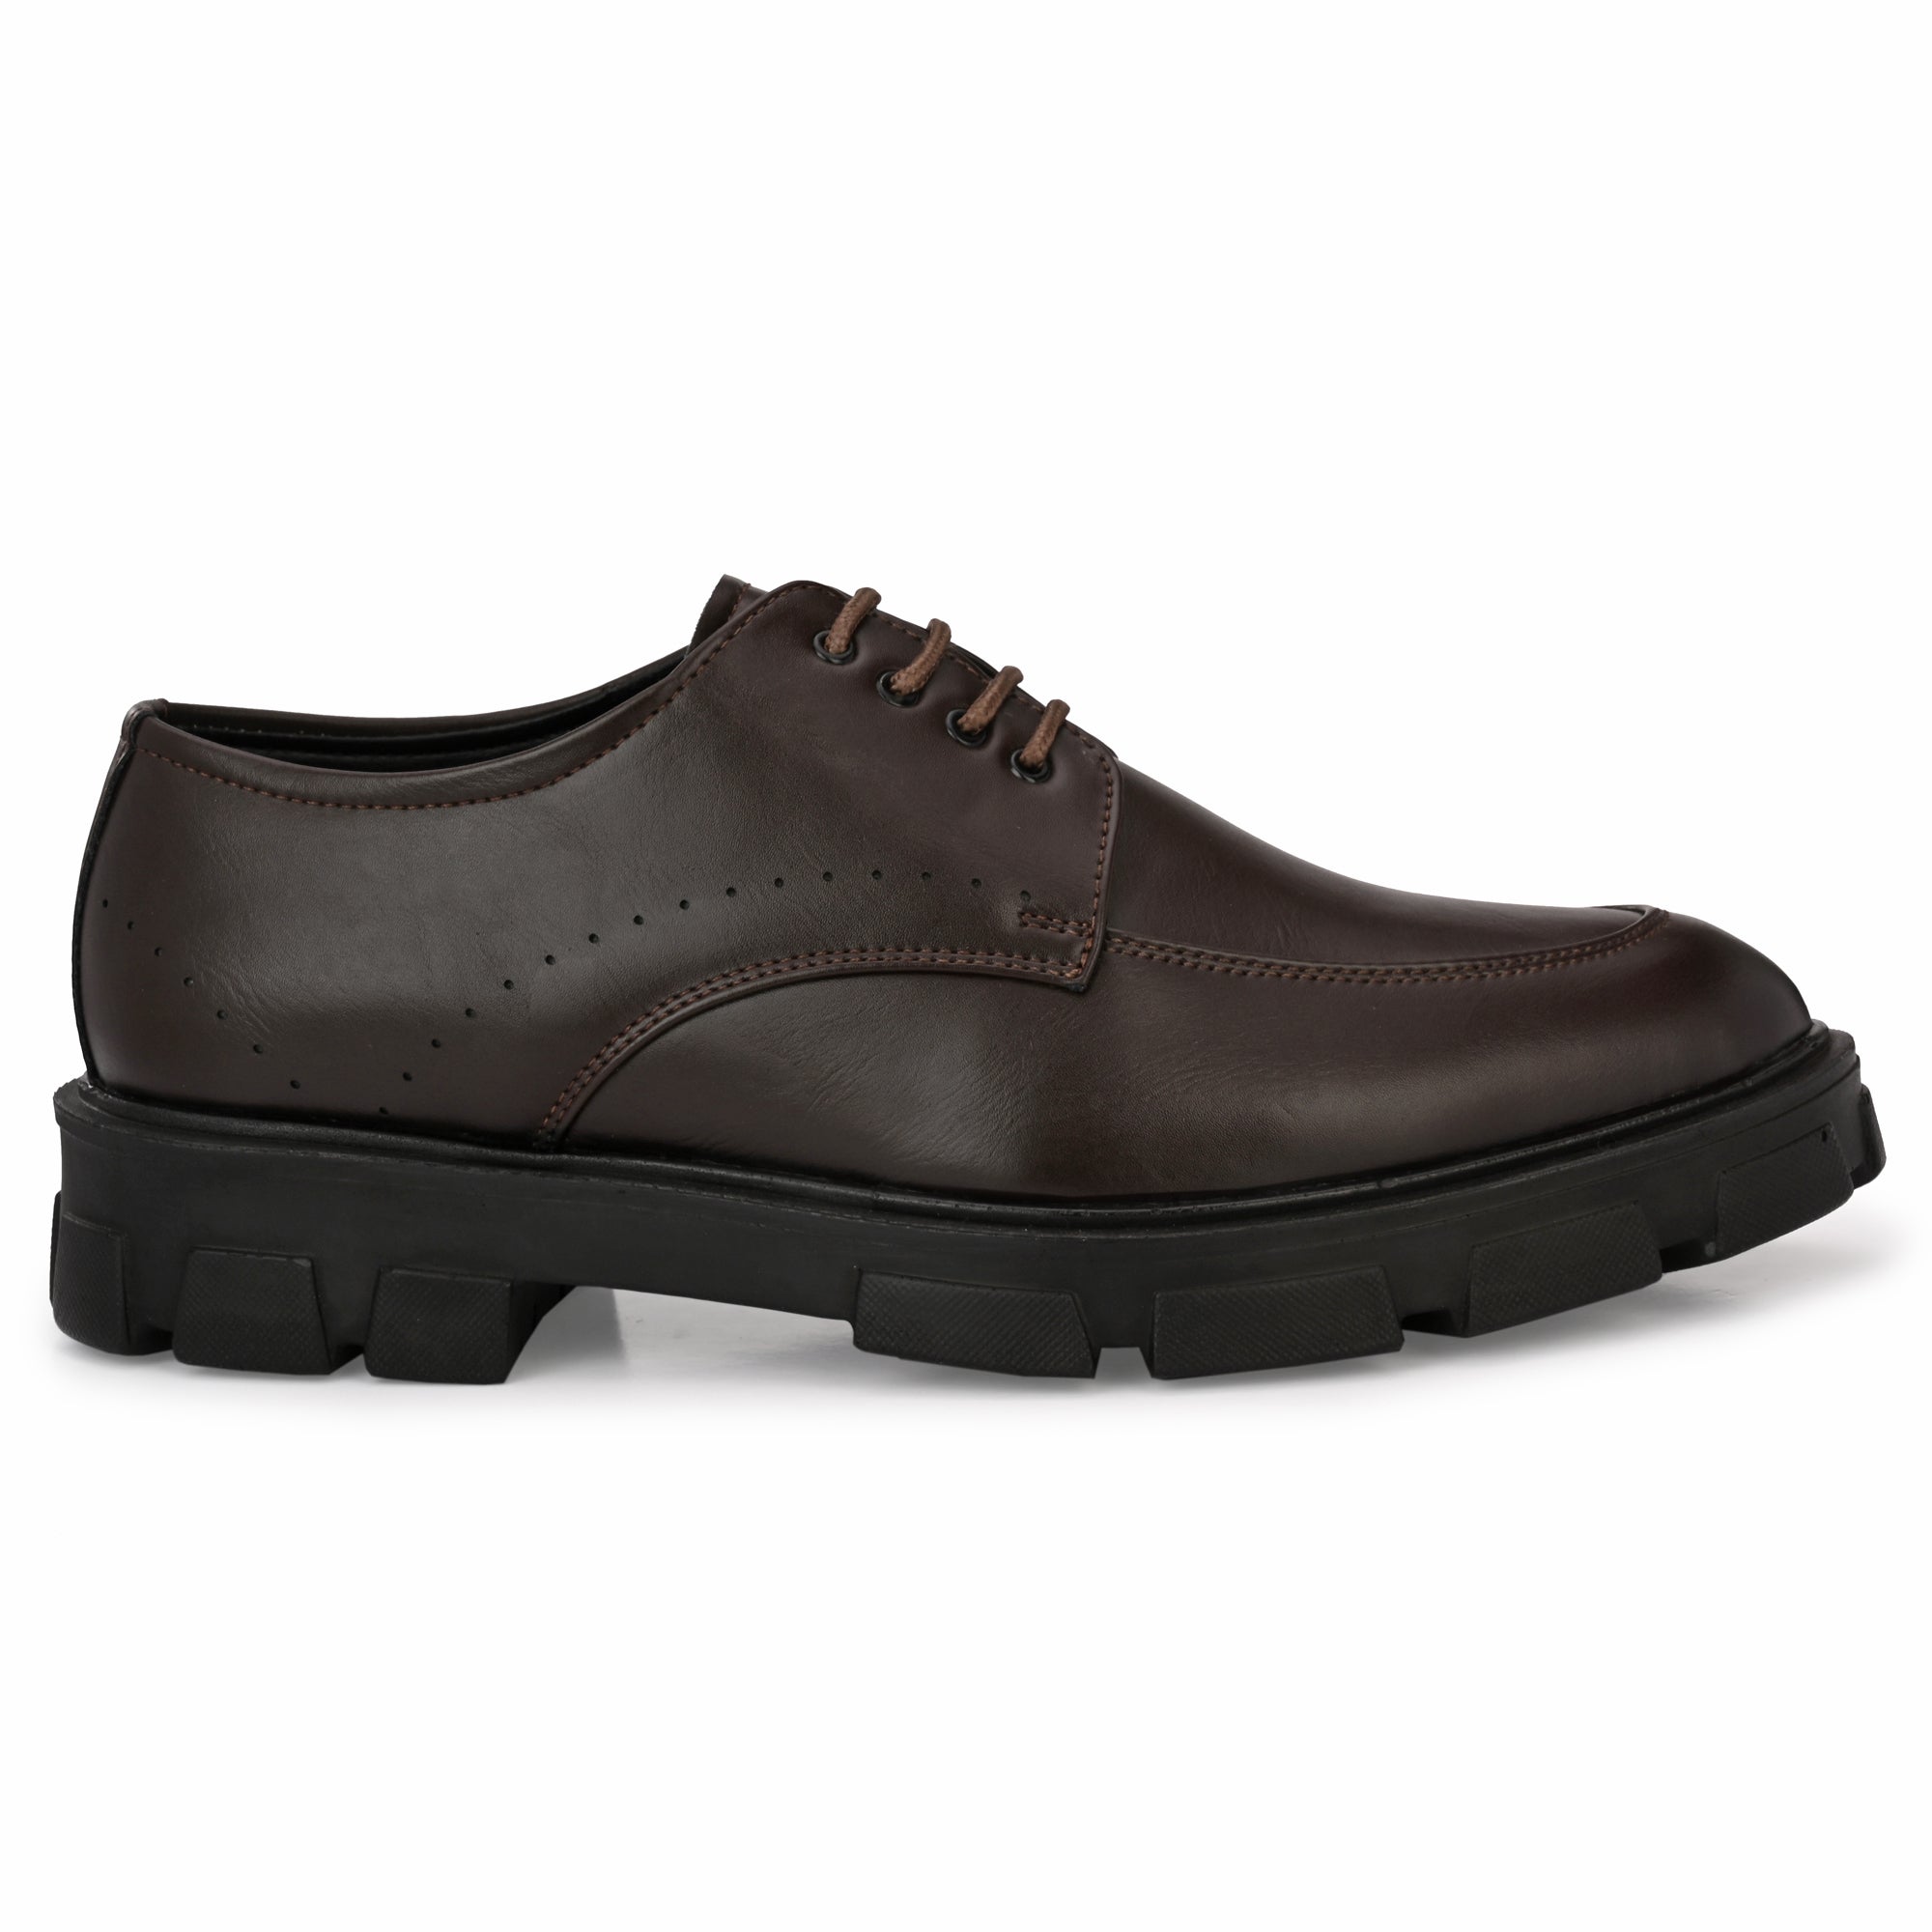 attitudist-brown-double-stitched-wing-tip-lace-up-derby-shoes-for-men